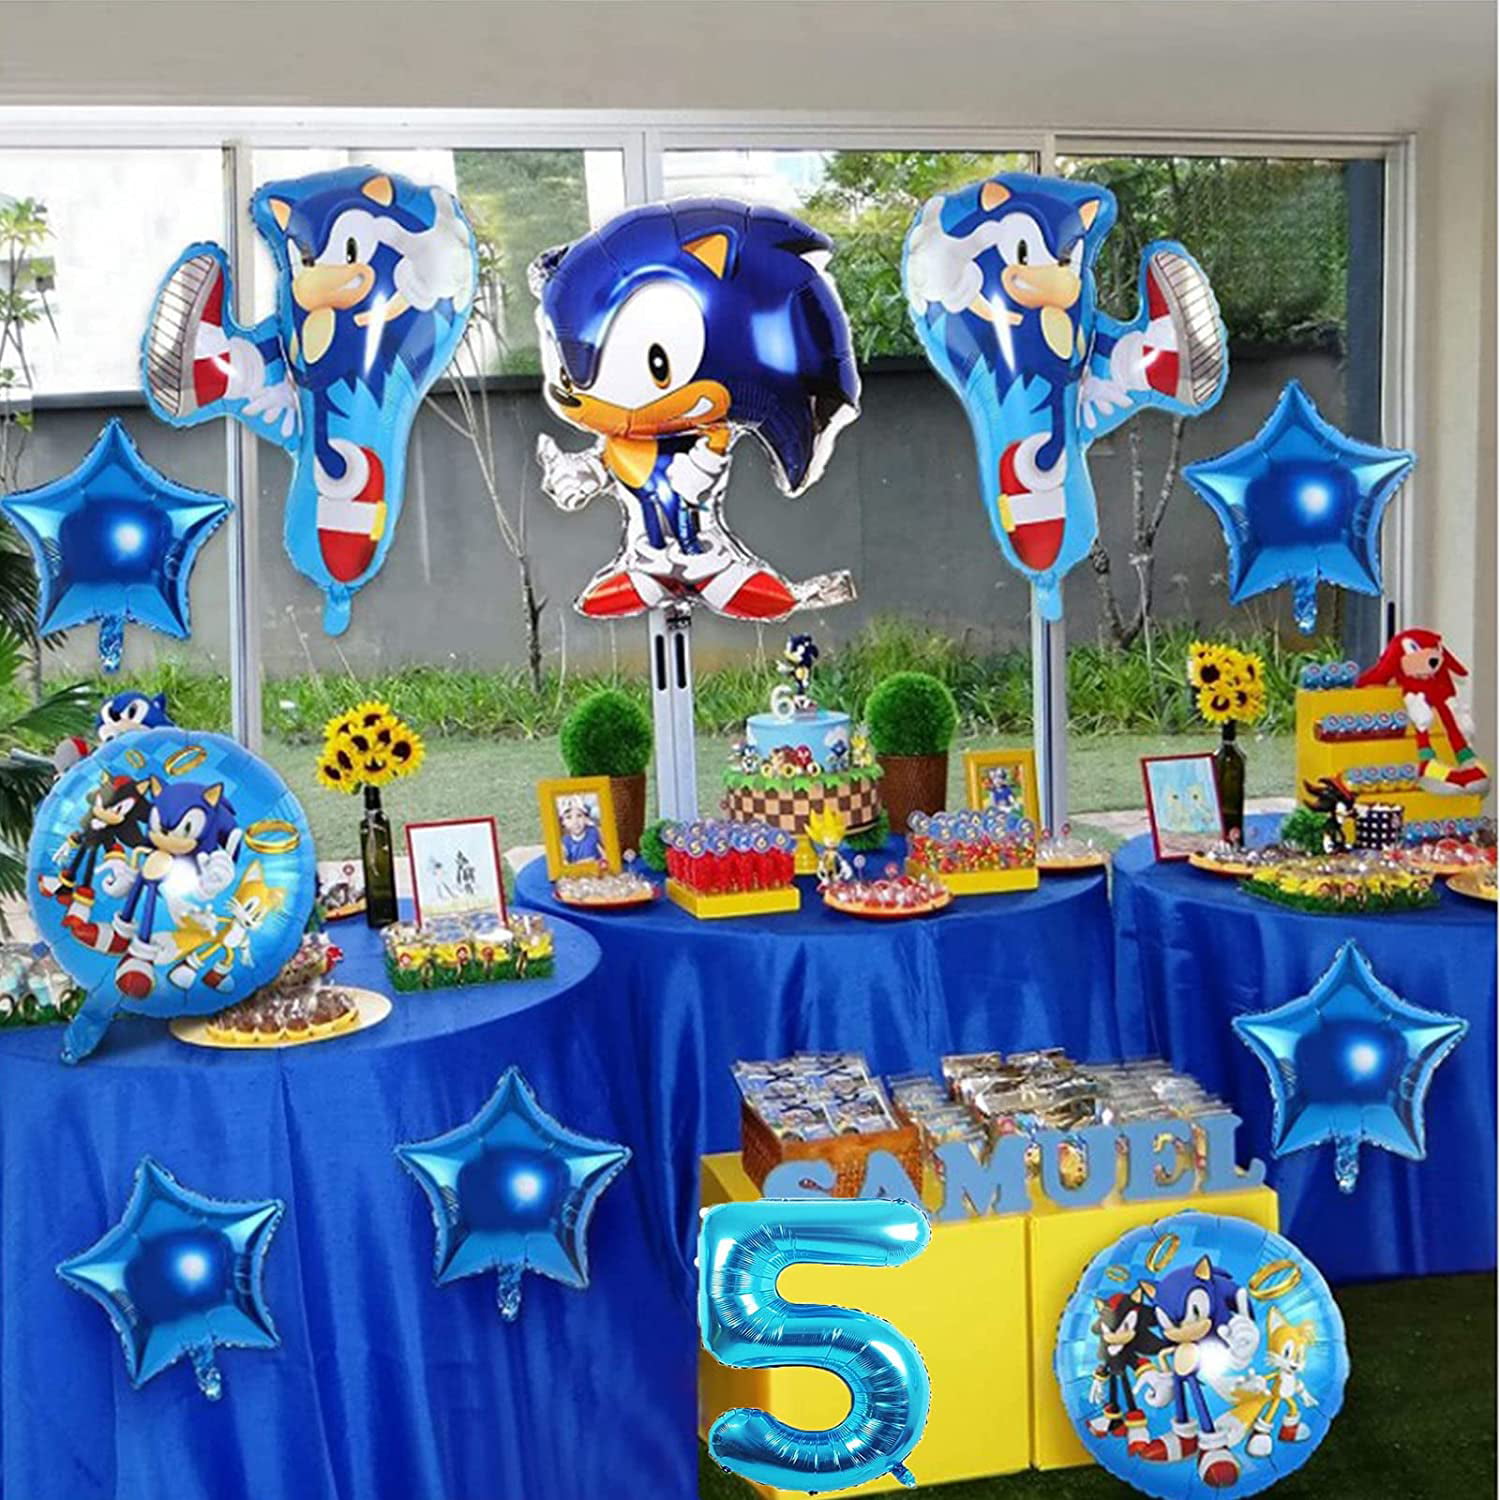 6 pcs Sonic Balloons,Sonic the Hedgehog Birthday Party Supplies,Kids Birthday  Party Favor Decorations Perfect for Your Themed Party - Mrs Space